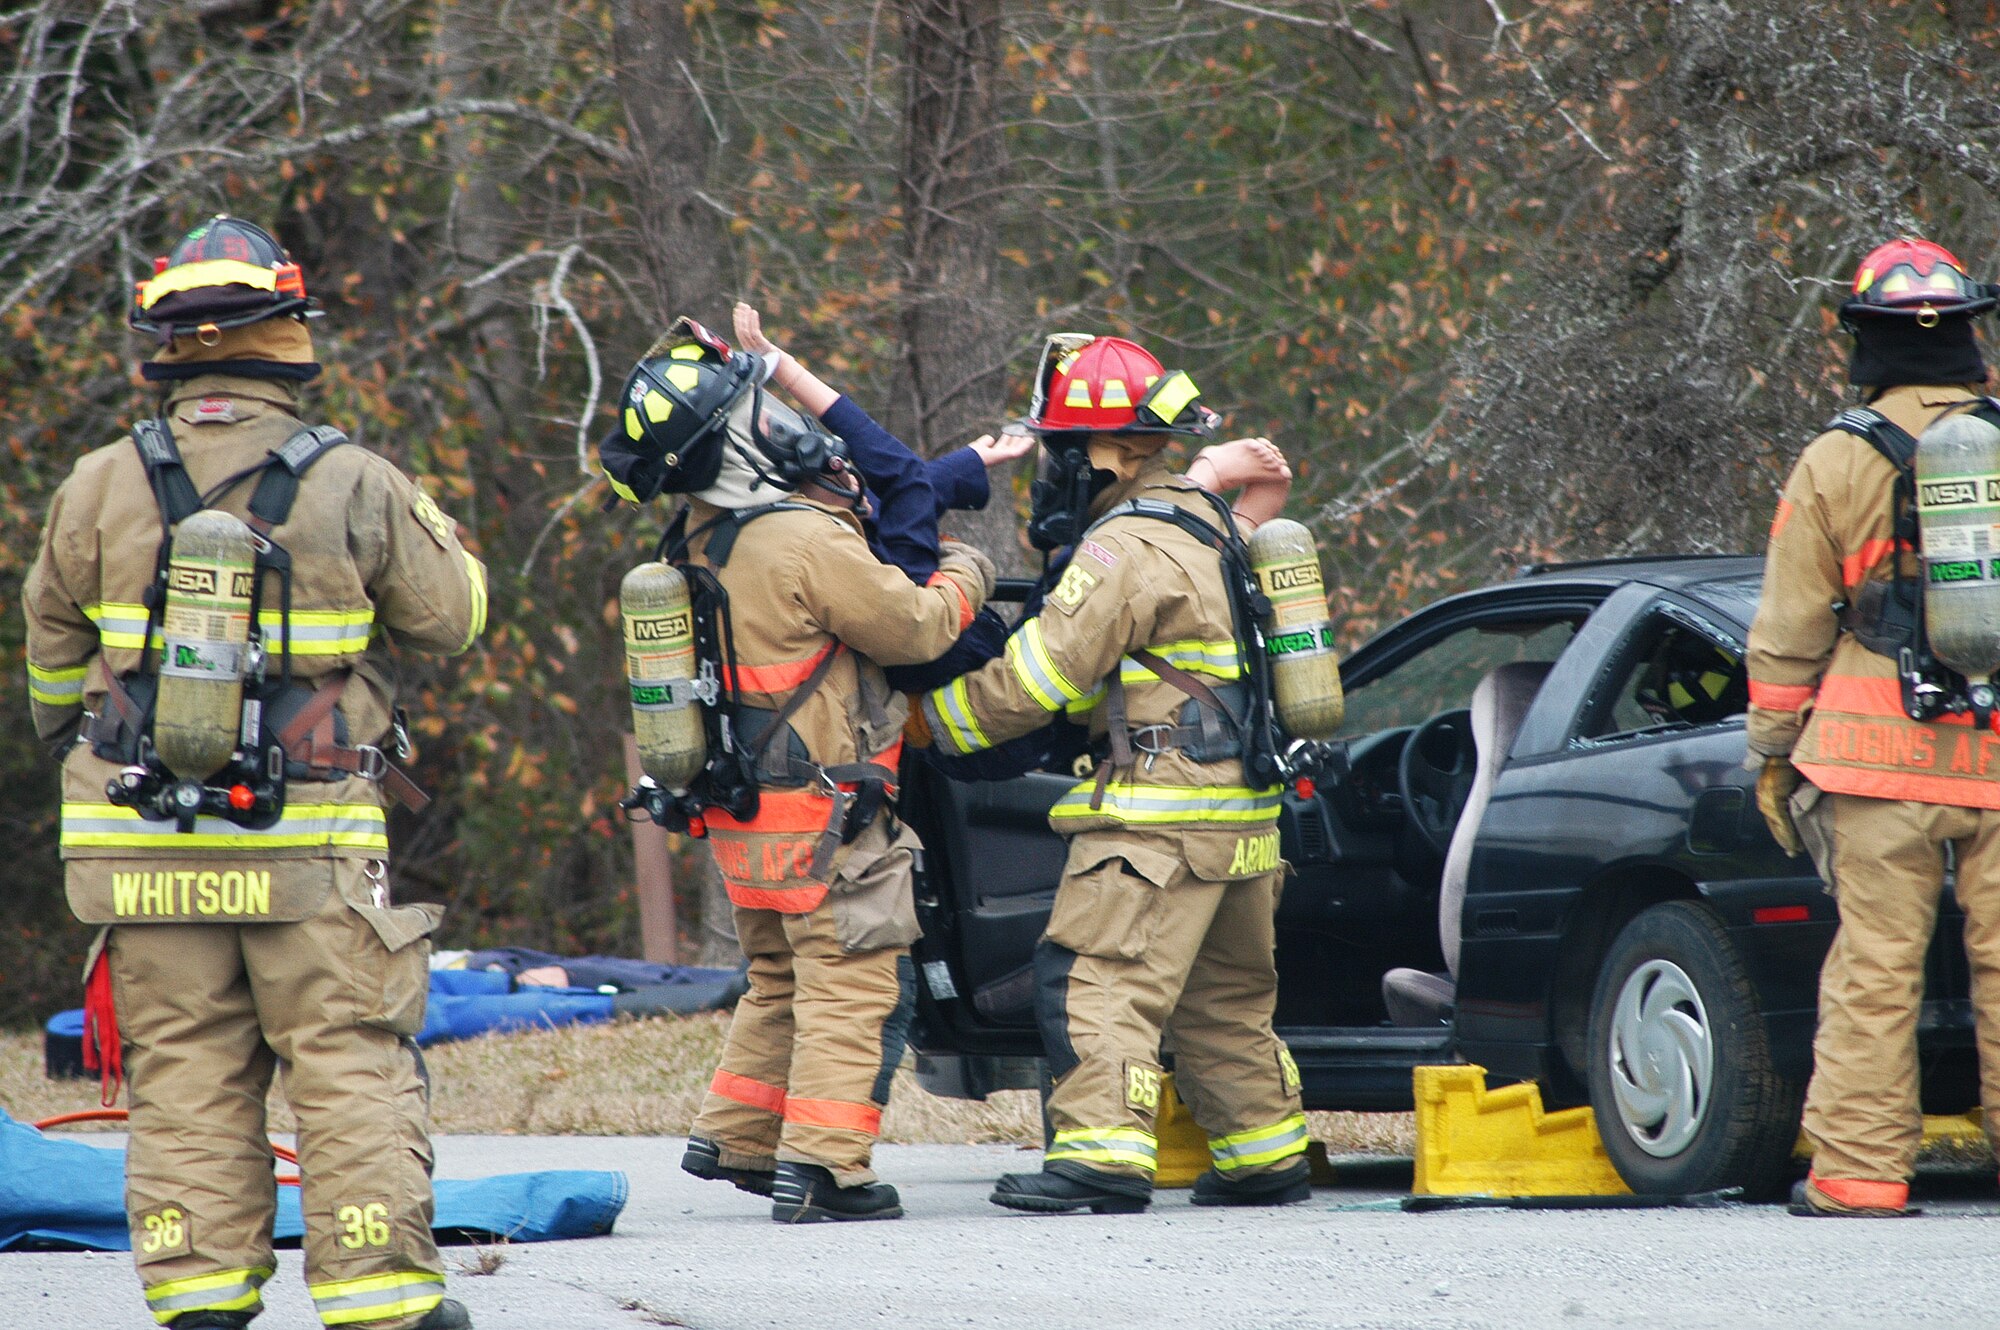 A simulated victim is removed from a vehicle during a fire training exercise. (U. S. Air Force photo/Sue Sapp)